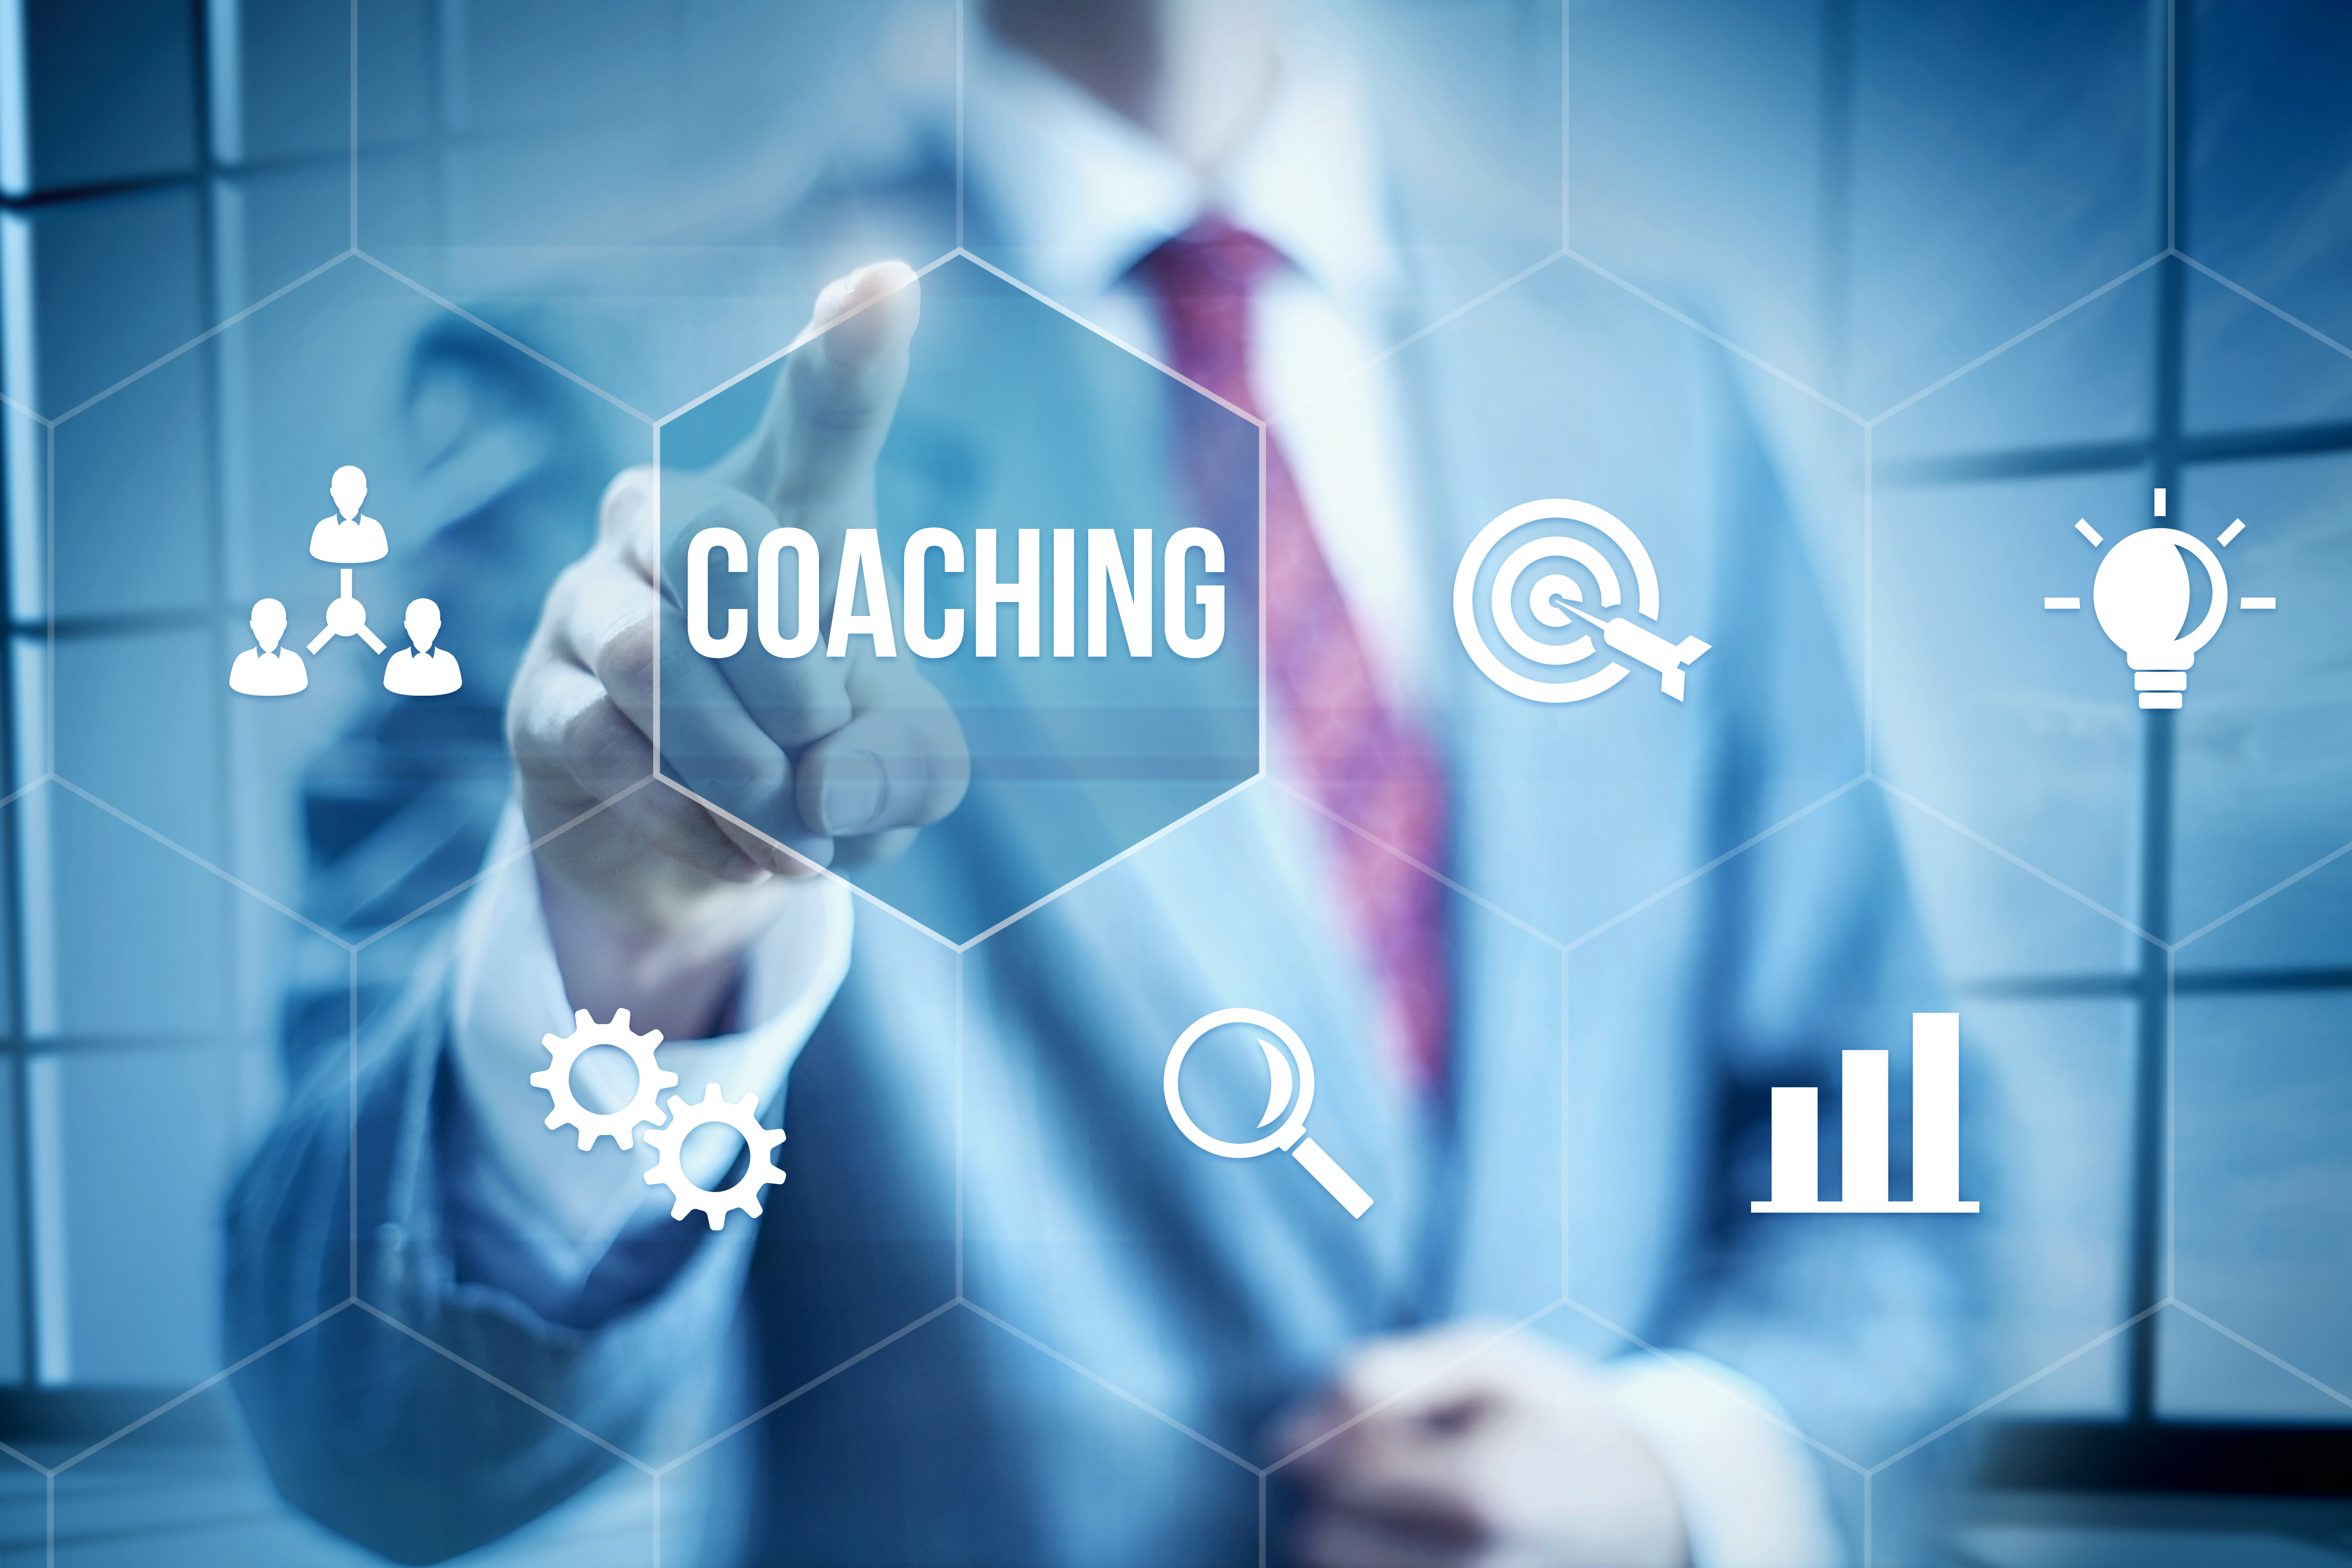 "The Power of Coaching for Capability Building" Course